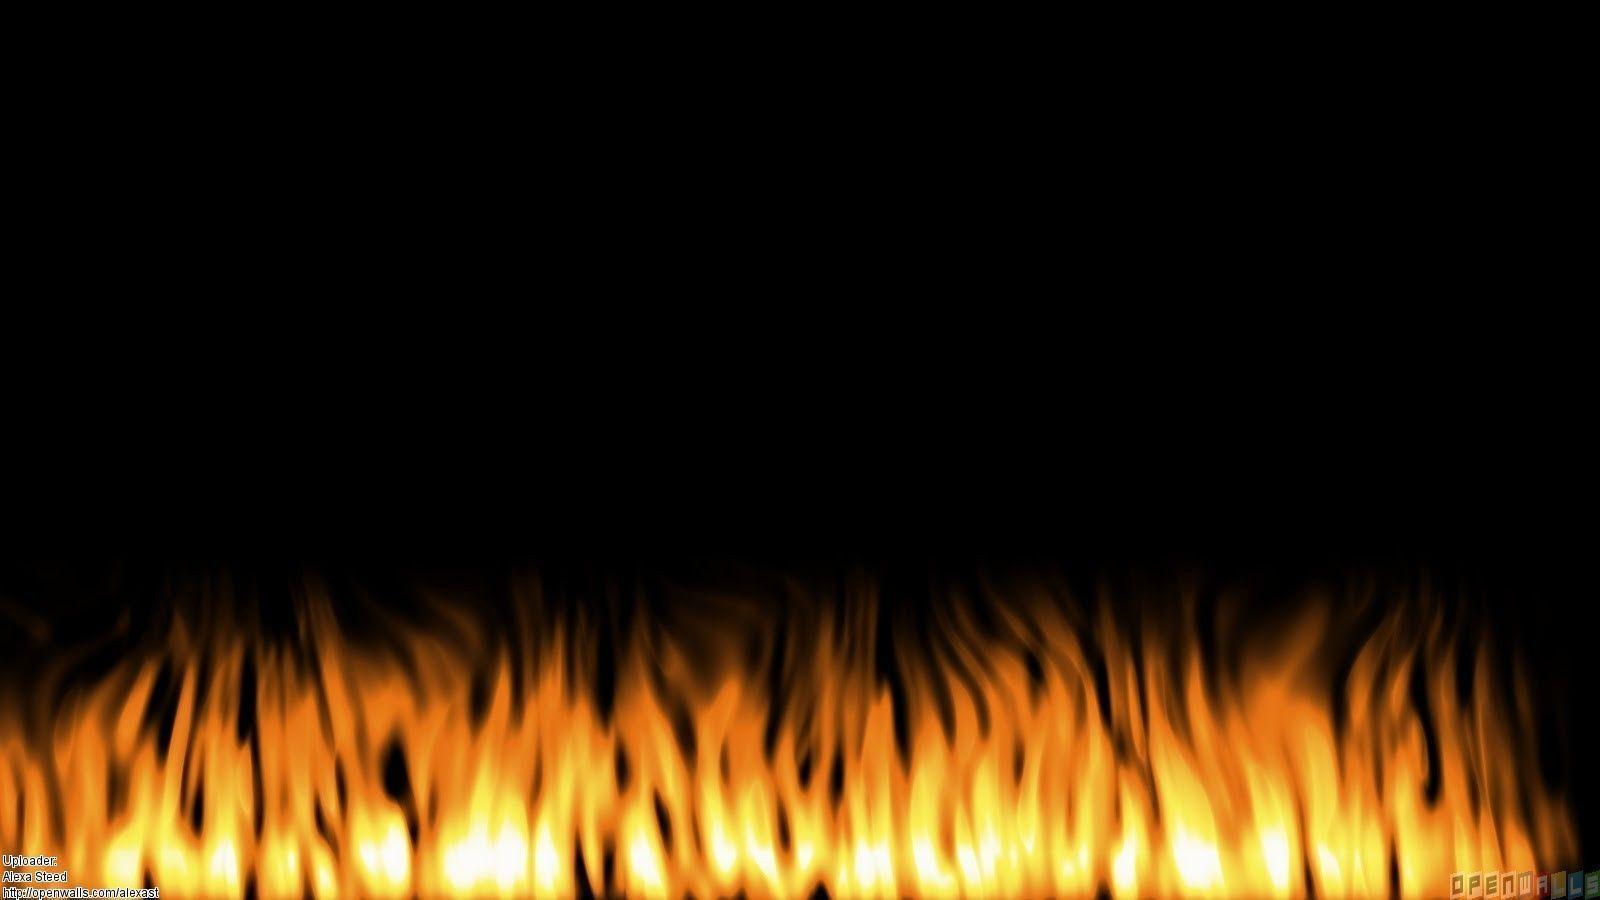 Flames on the black background wallpaper